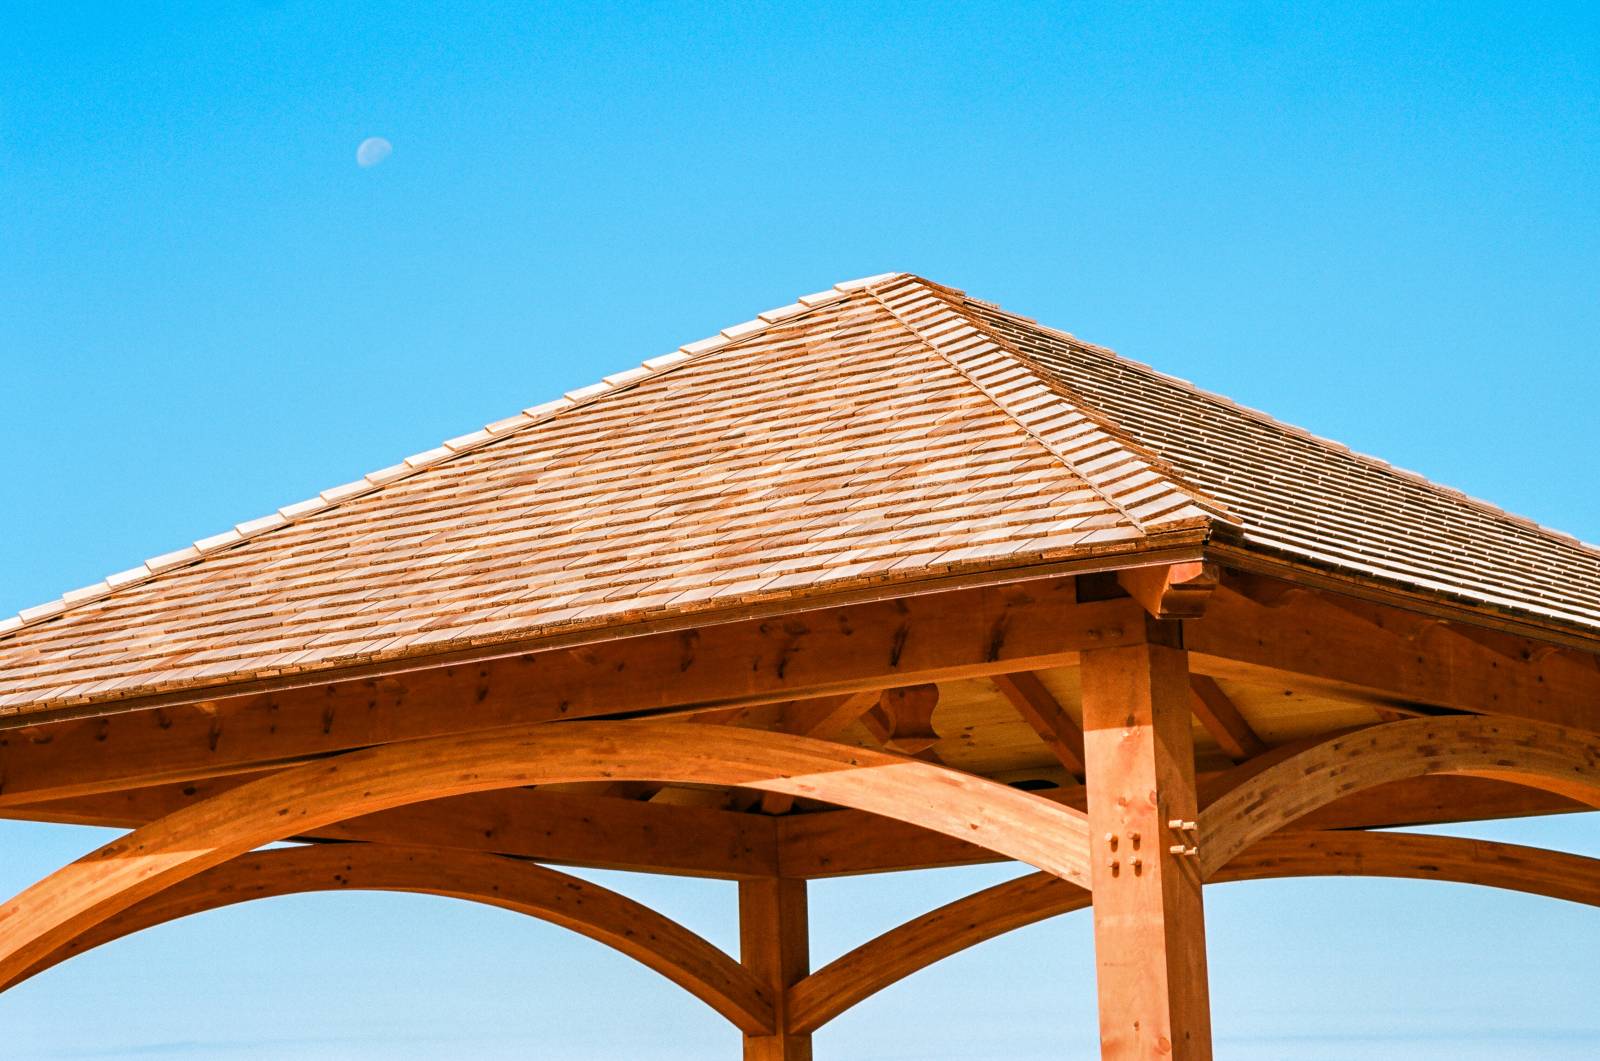 Cedar Shake Roof on Timber Frame Pavilion (notice the moon?)